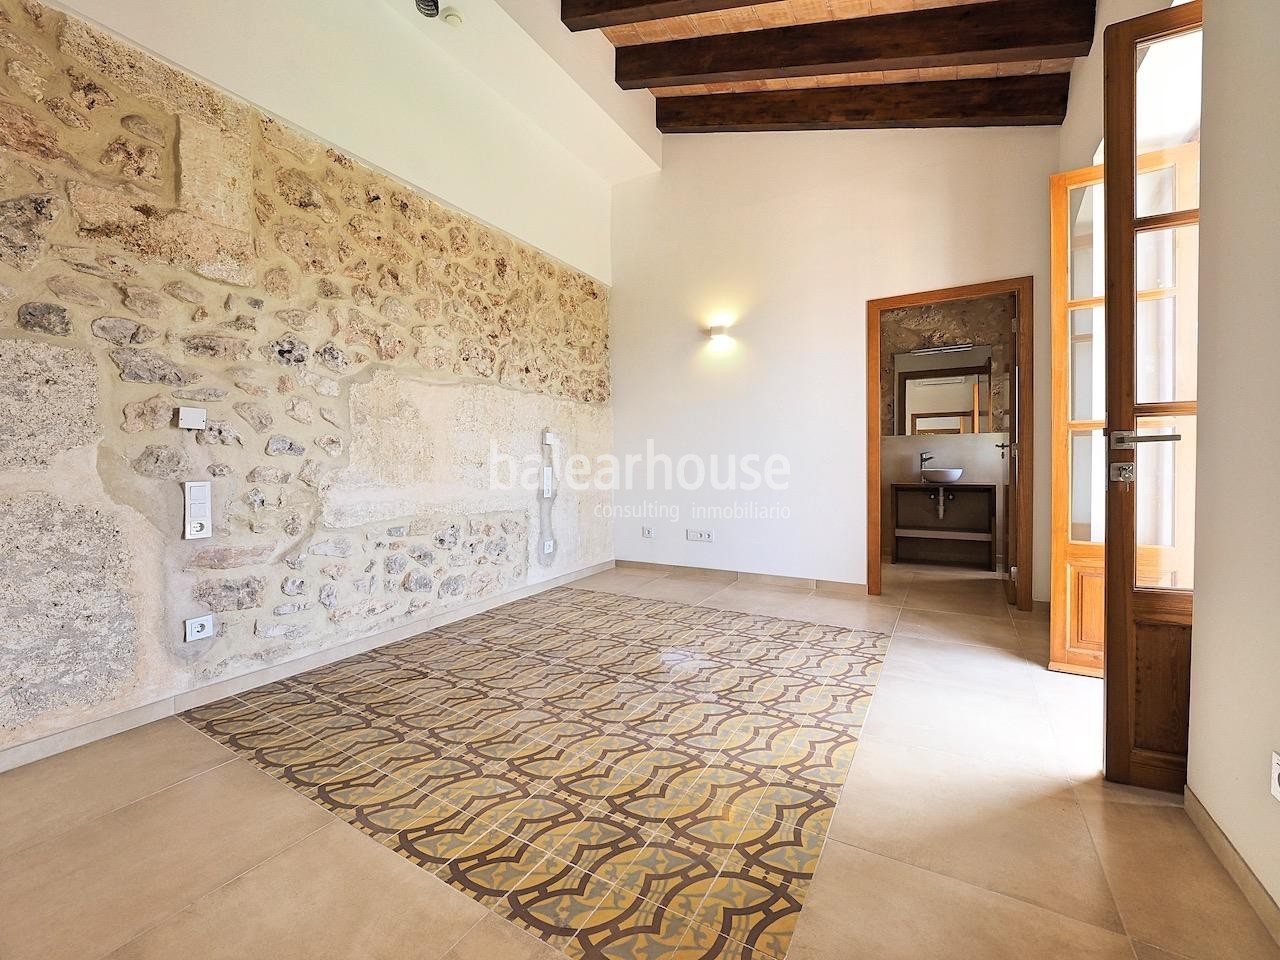 Exclusive Boutique Hotel for sale in Sineu; unique opportunity for an unbeatable investment